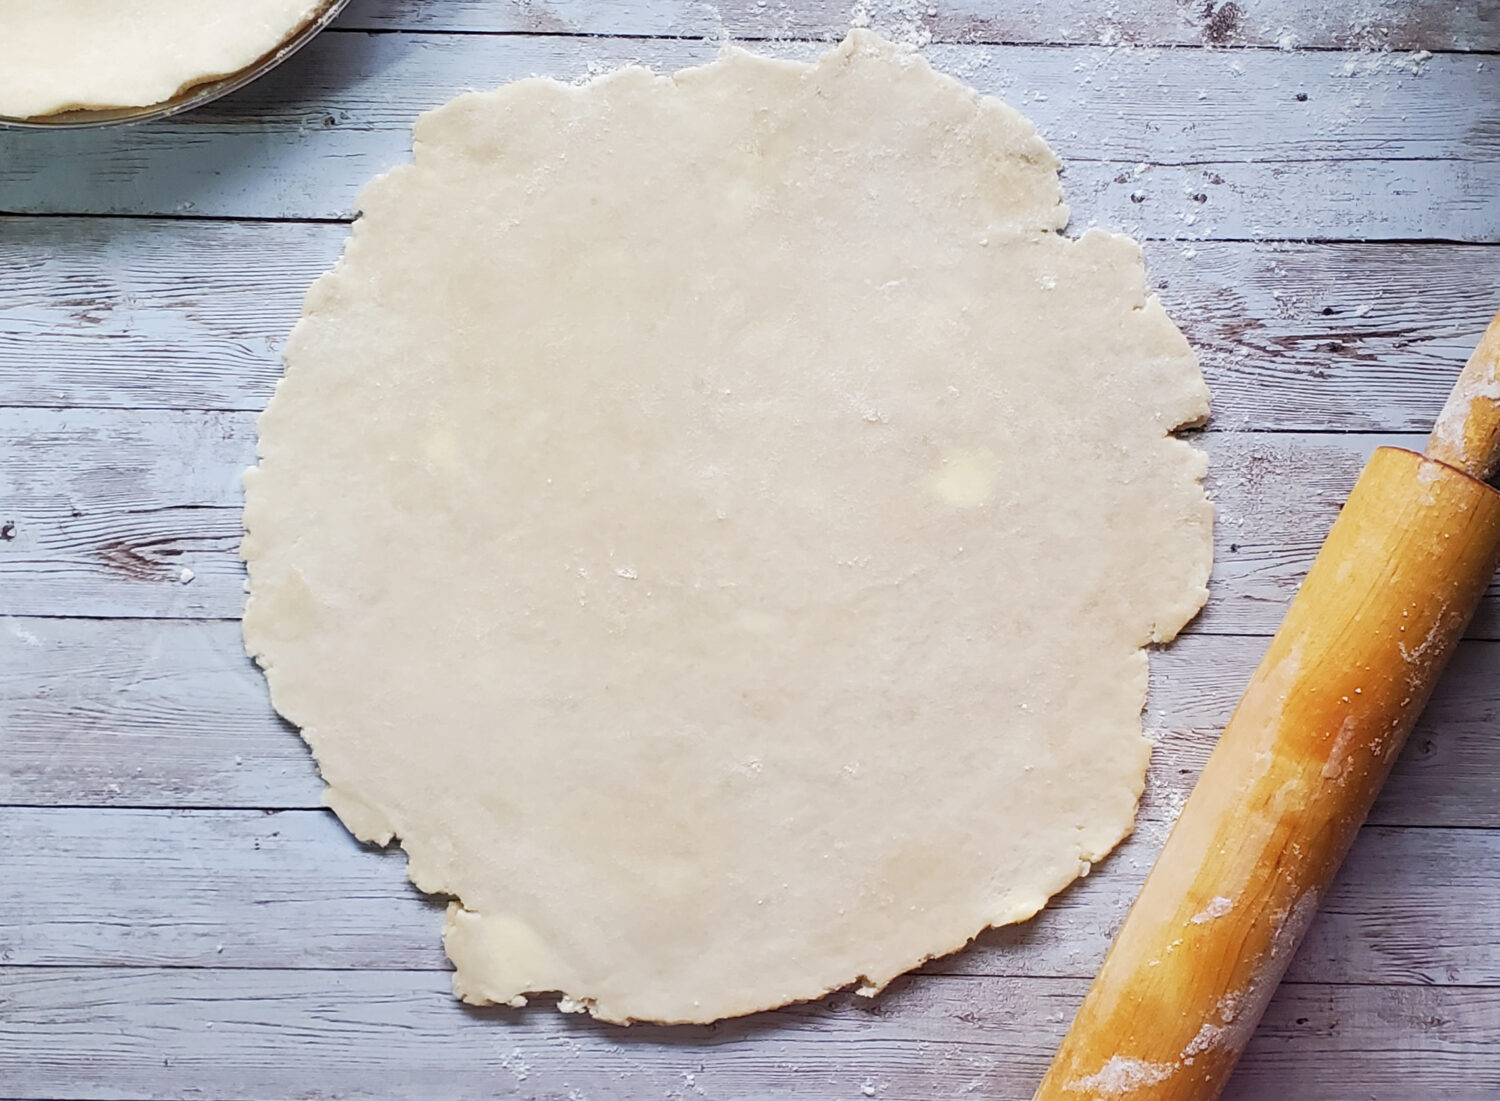 Grandma's Pie Crust; The flakiest baked pie crust with the perfect fat to flour ratio, and tips straight from my Grandma to you.